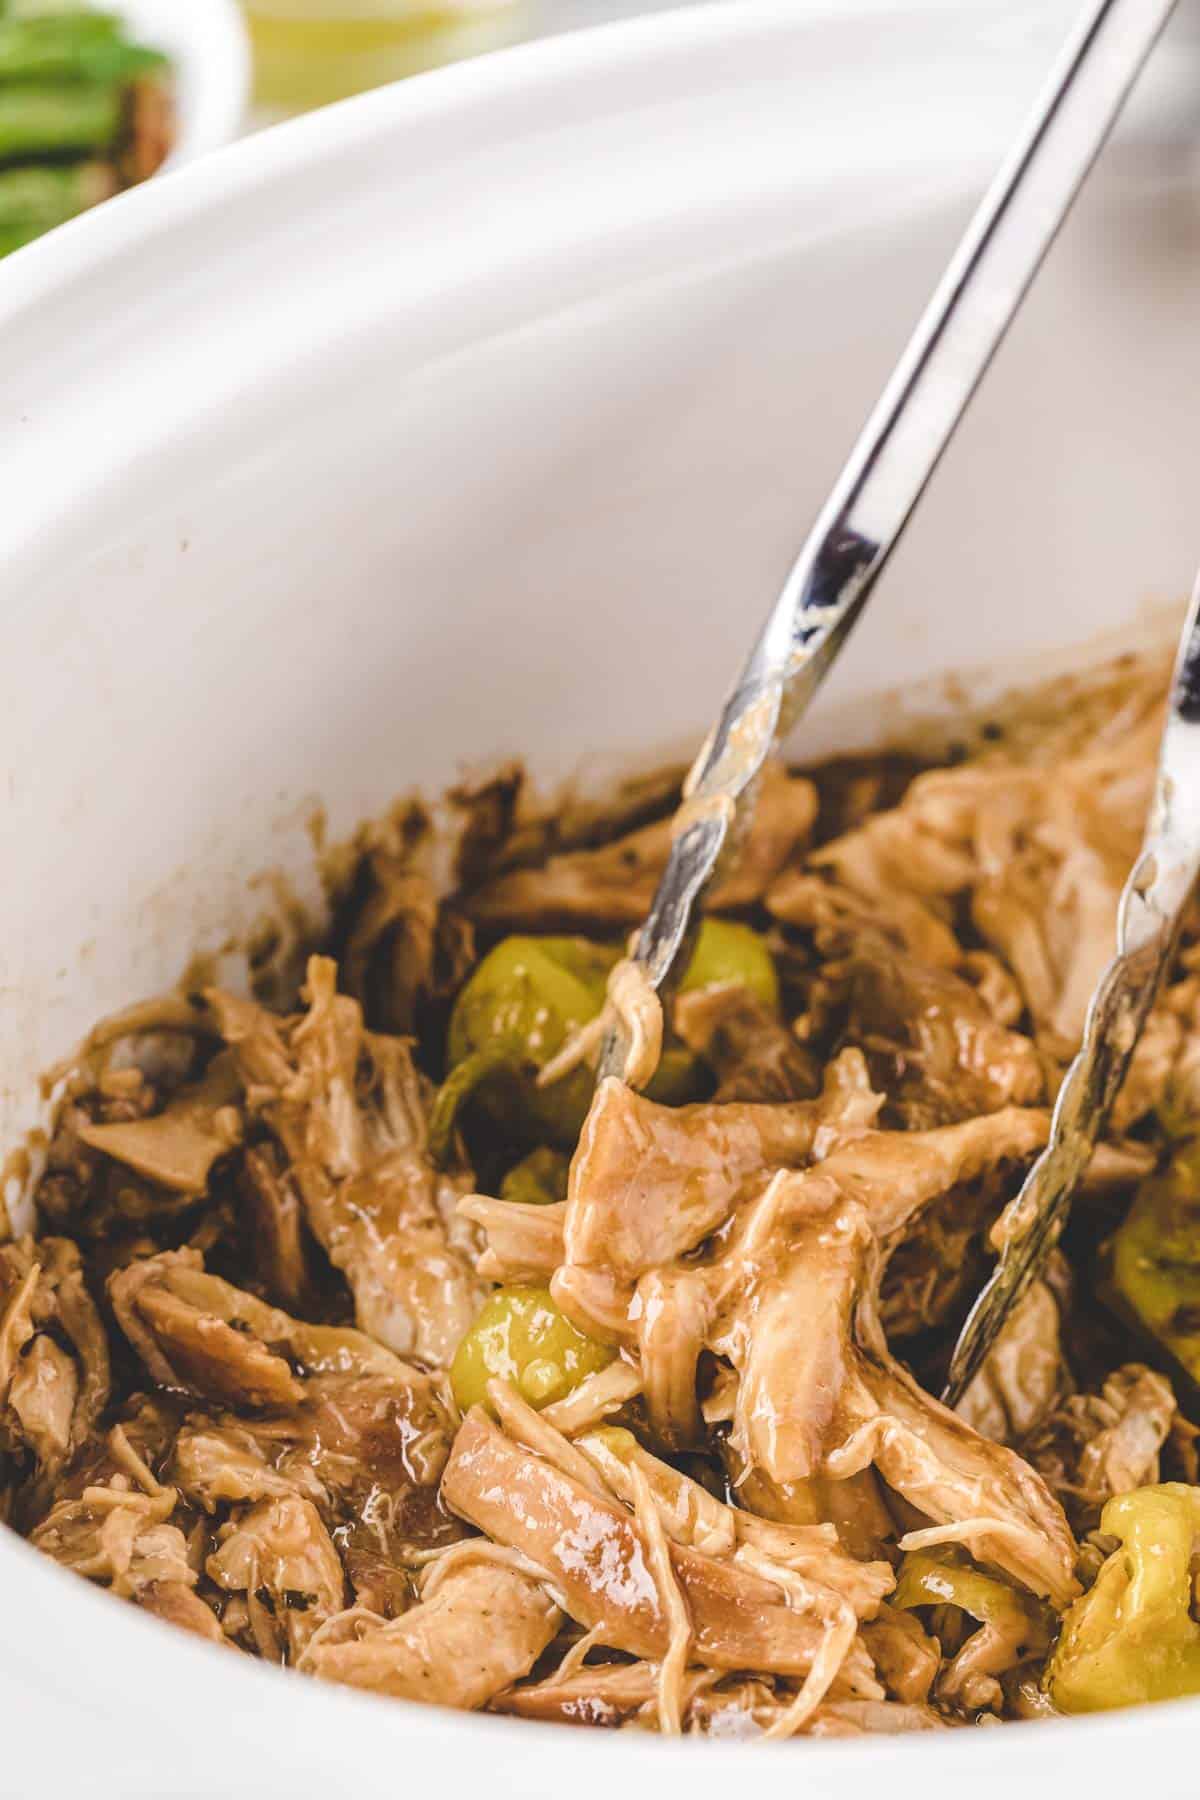 Tongs stirring chicken in a white slow cooker crock.